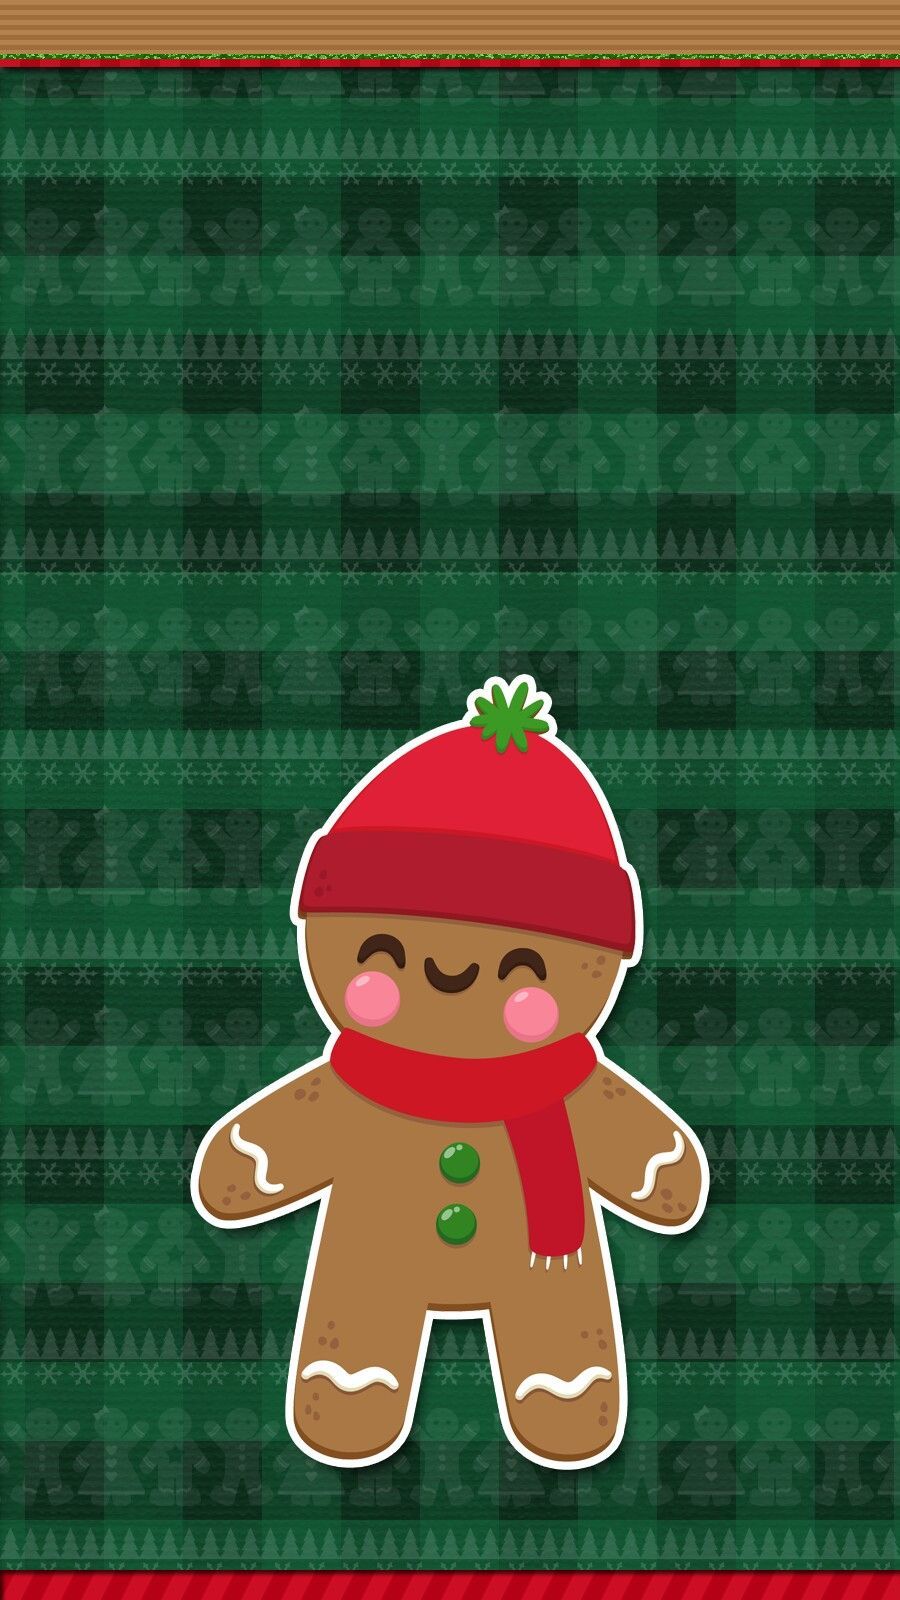 cute #gingerbread #wallpaper #iphone #android #christmas. iPhone wallpaper winter, Wallpaper iphone christmas, Christmas phone wallpaper